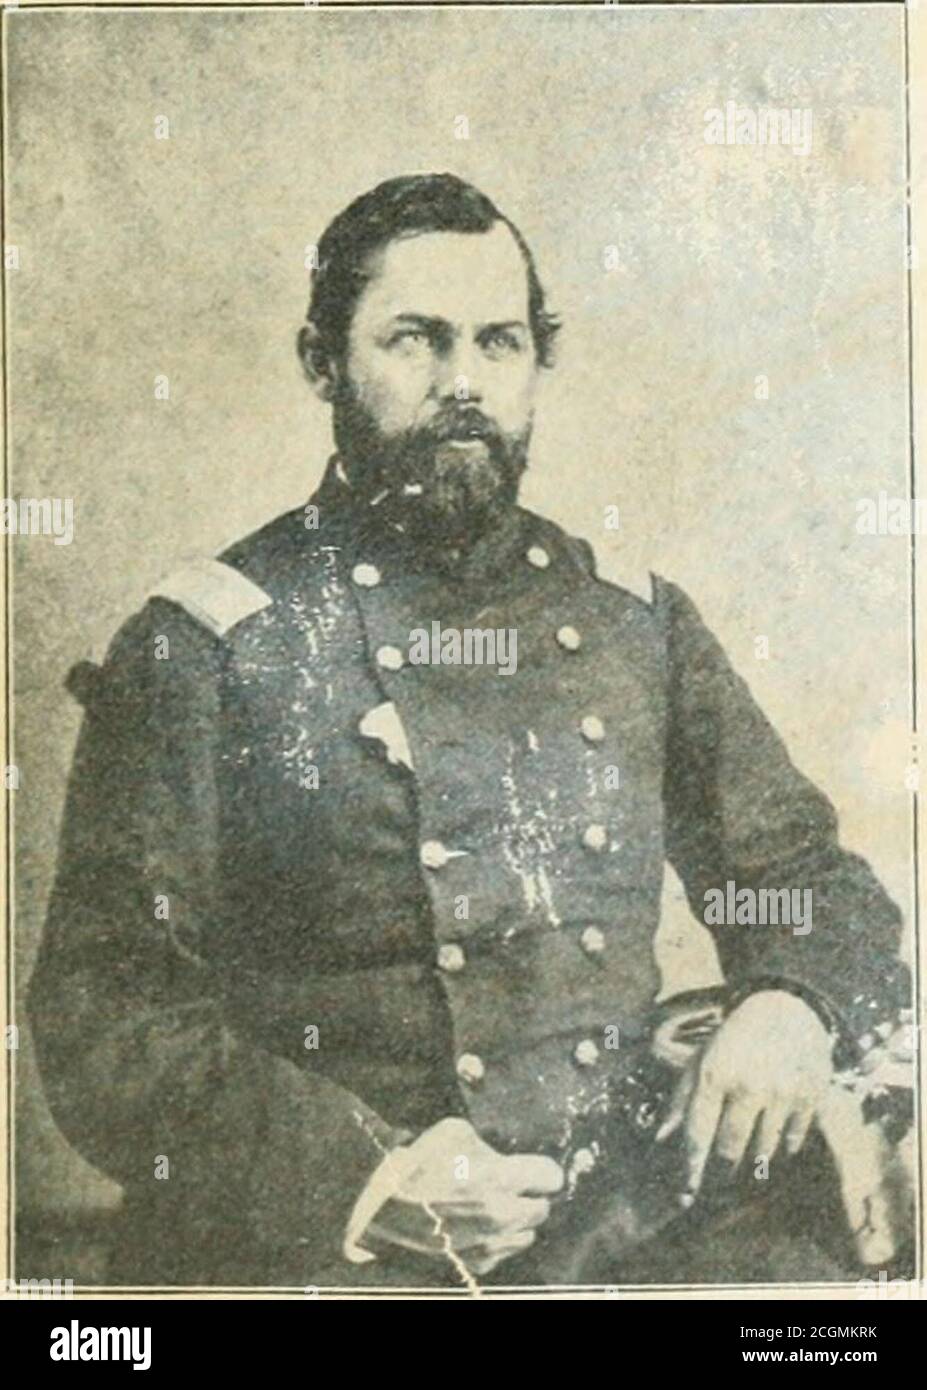 . Trials and triumphs : the record of the Fifty-Fifth Ohio Volunteer Infantry . Charles 1&gt;. G. aibee Colonel, Fifty-Fifth Oiiio olunteer I:.tantry Killed M.av ts. i^ti4. iN B.^ ttlf of 11ks. .a. (iA.. George H. Sa.fford Lieutenant-Colonel, P.ifty-Fifth Ohio Volunteer Inf^-ntry Stock Photo